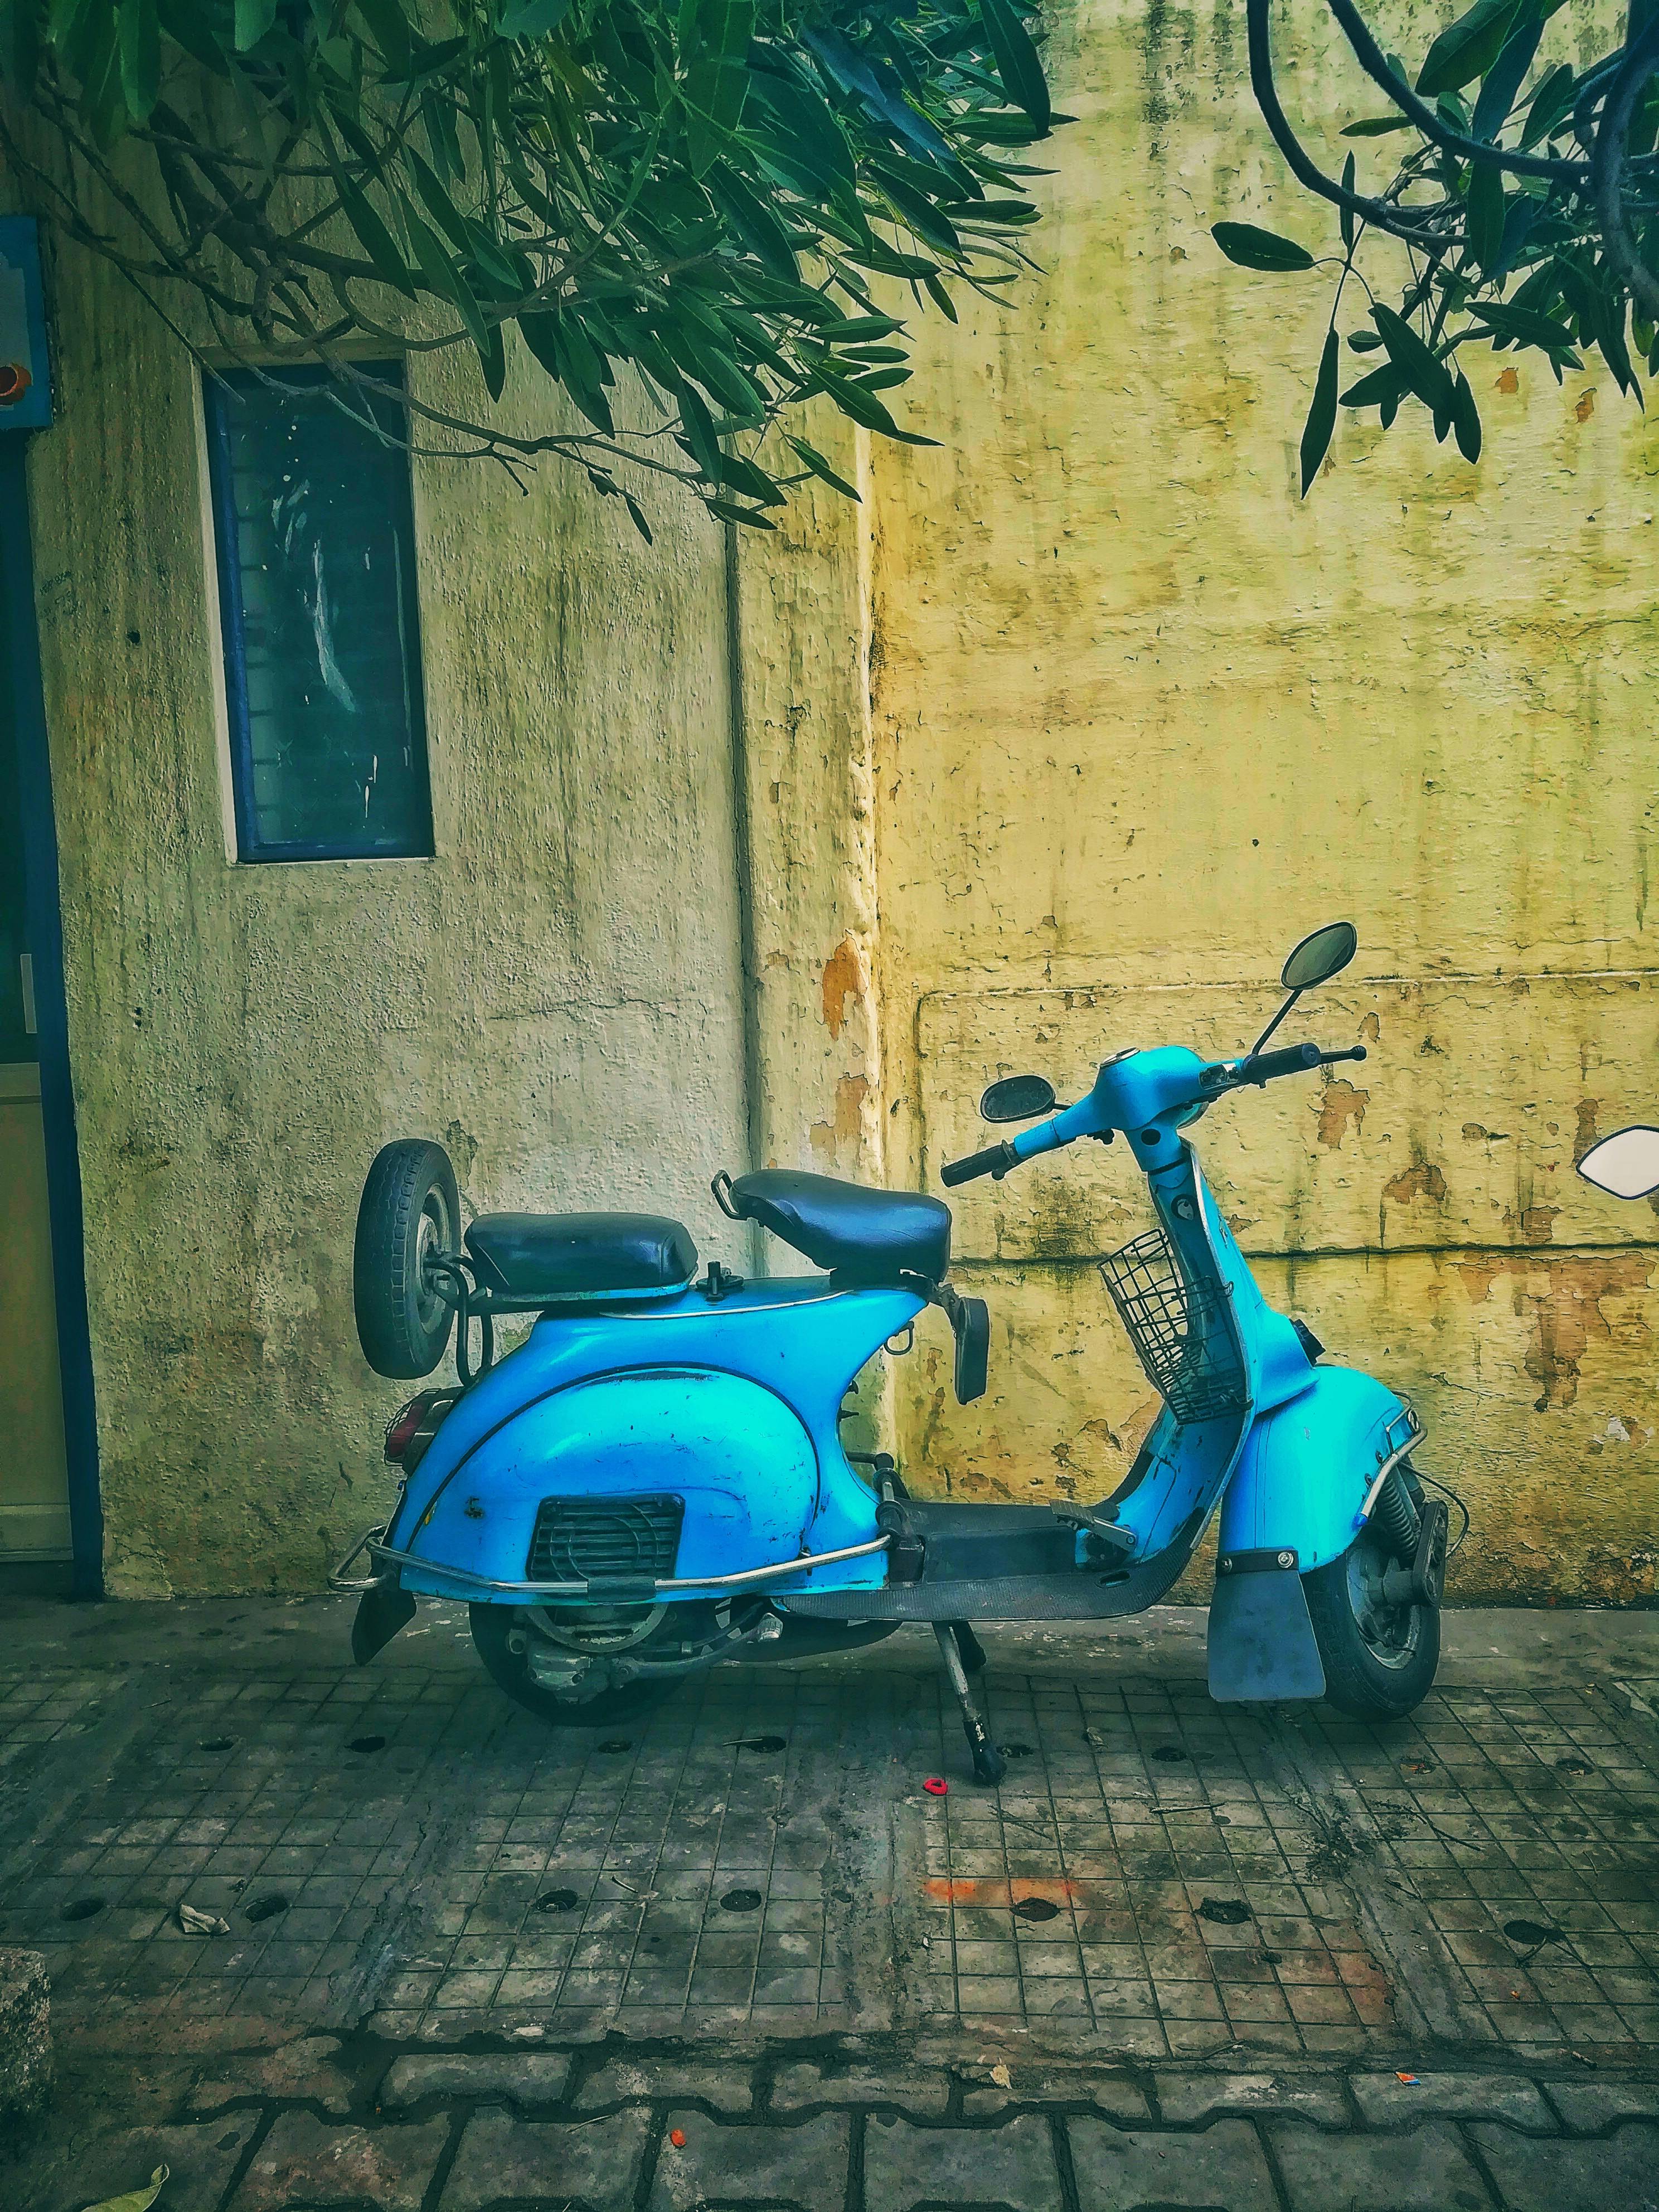 Download Scooter wallpapers for mobile phone free Scooter HD pictures